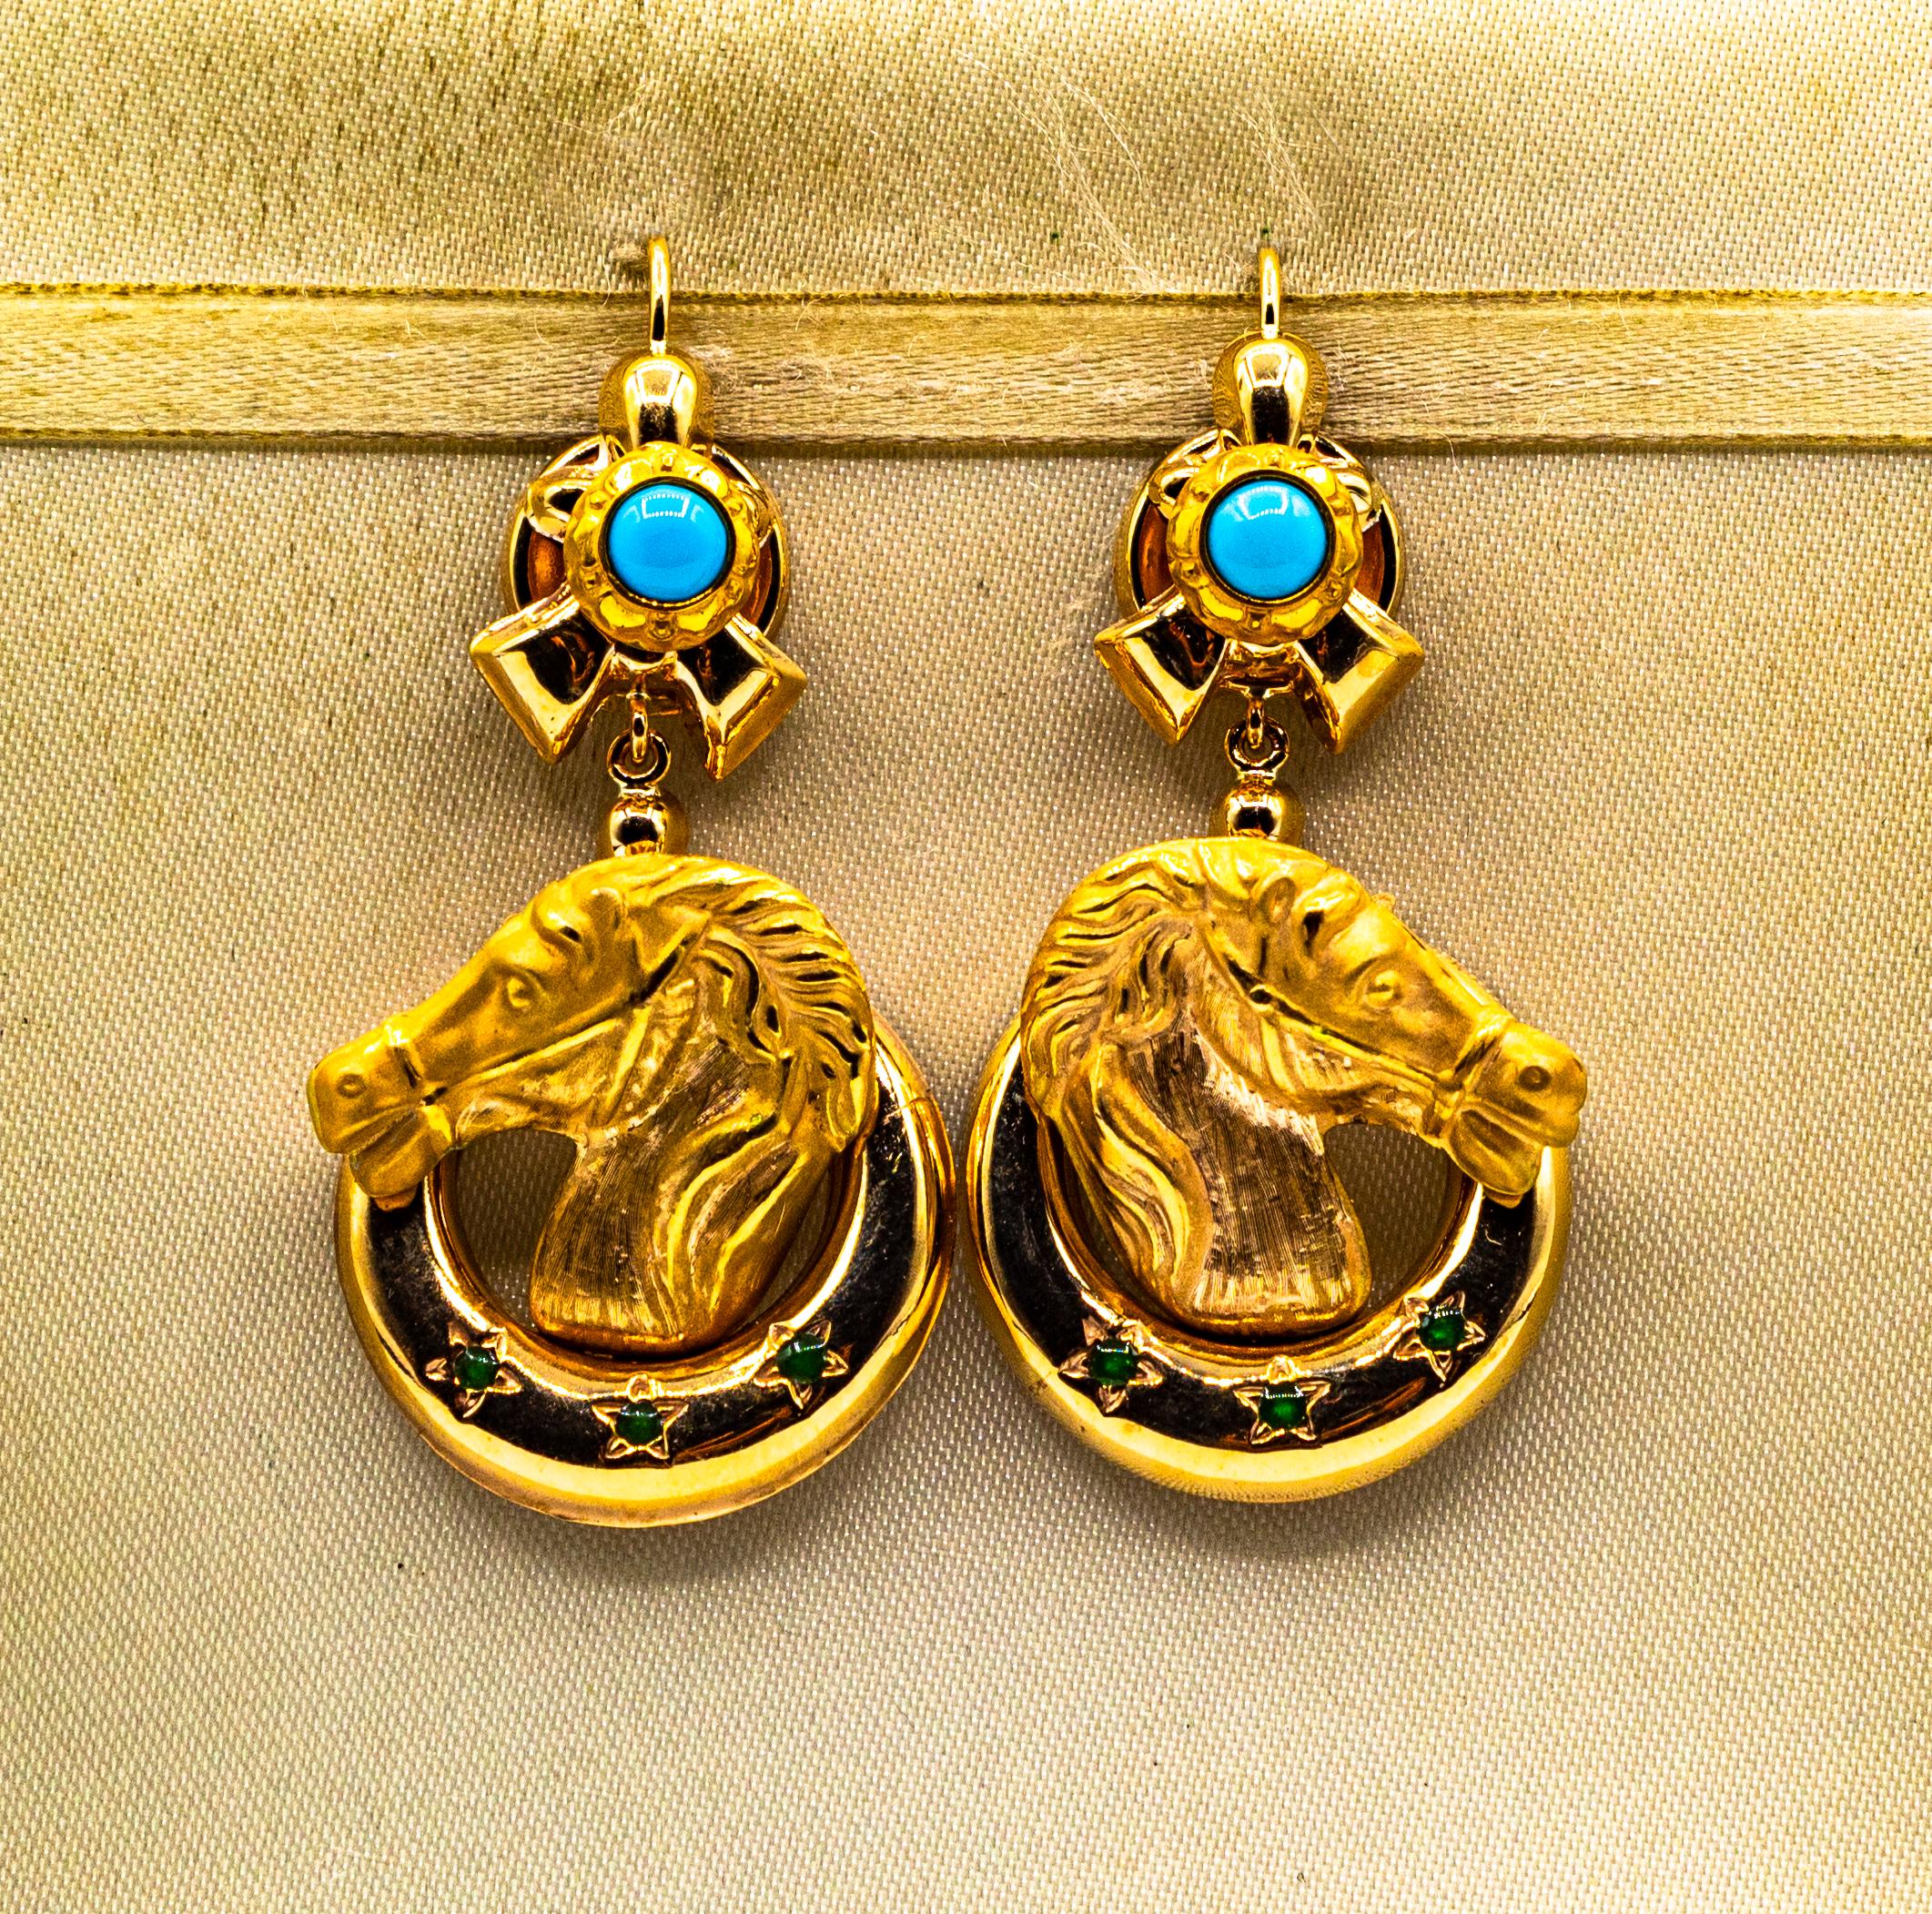 These Earrings are made of 9K Yellow Gold.
These Earrings have Natural Turquoise and Enamel.
These Earrings are inspired by Art Nouveau.

All our Earrings have pins for pierced ears but we can change the closure and make any of our Earrings suitable